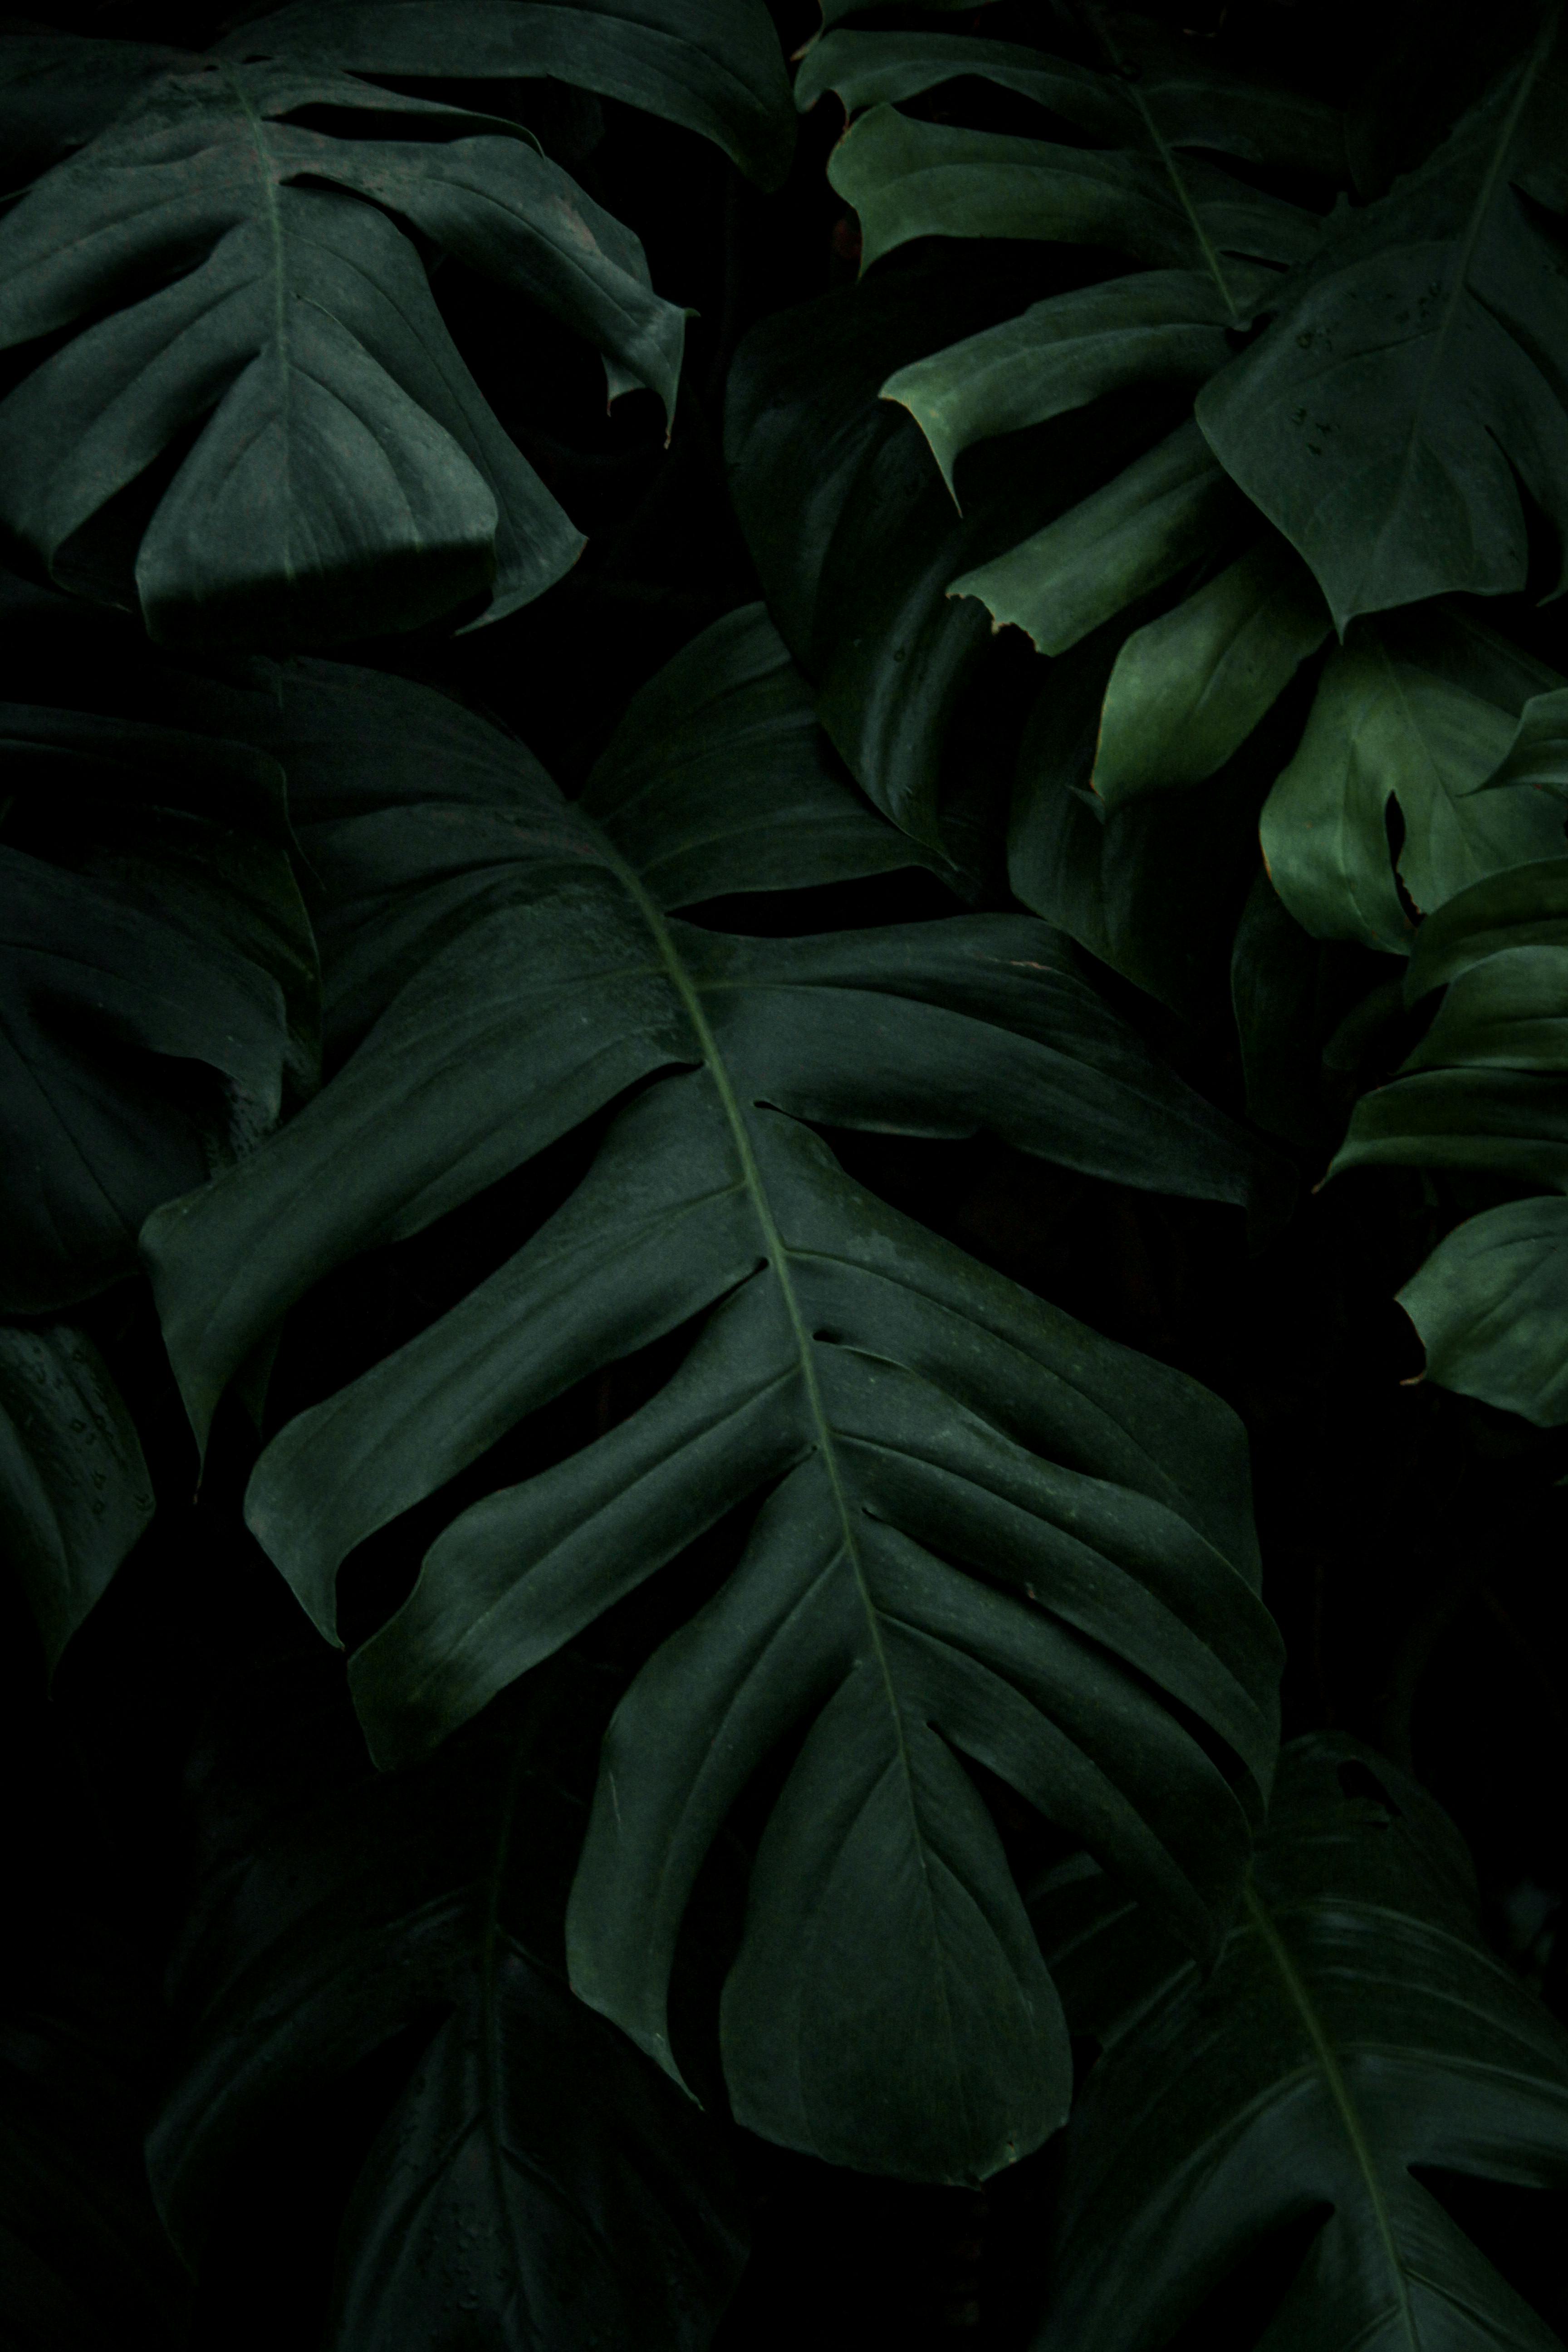 Tropical Leaves Abstract Green Leaves Texture Nature Background Stock Photo   Download Image Now  iStock